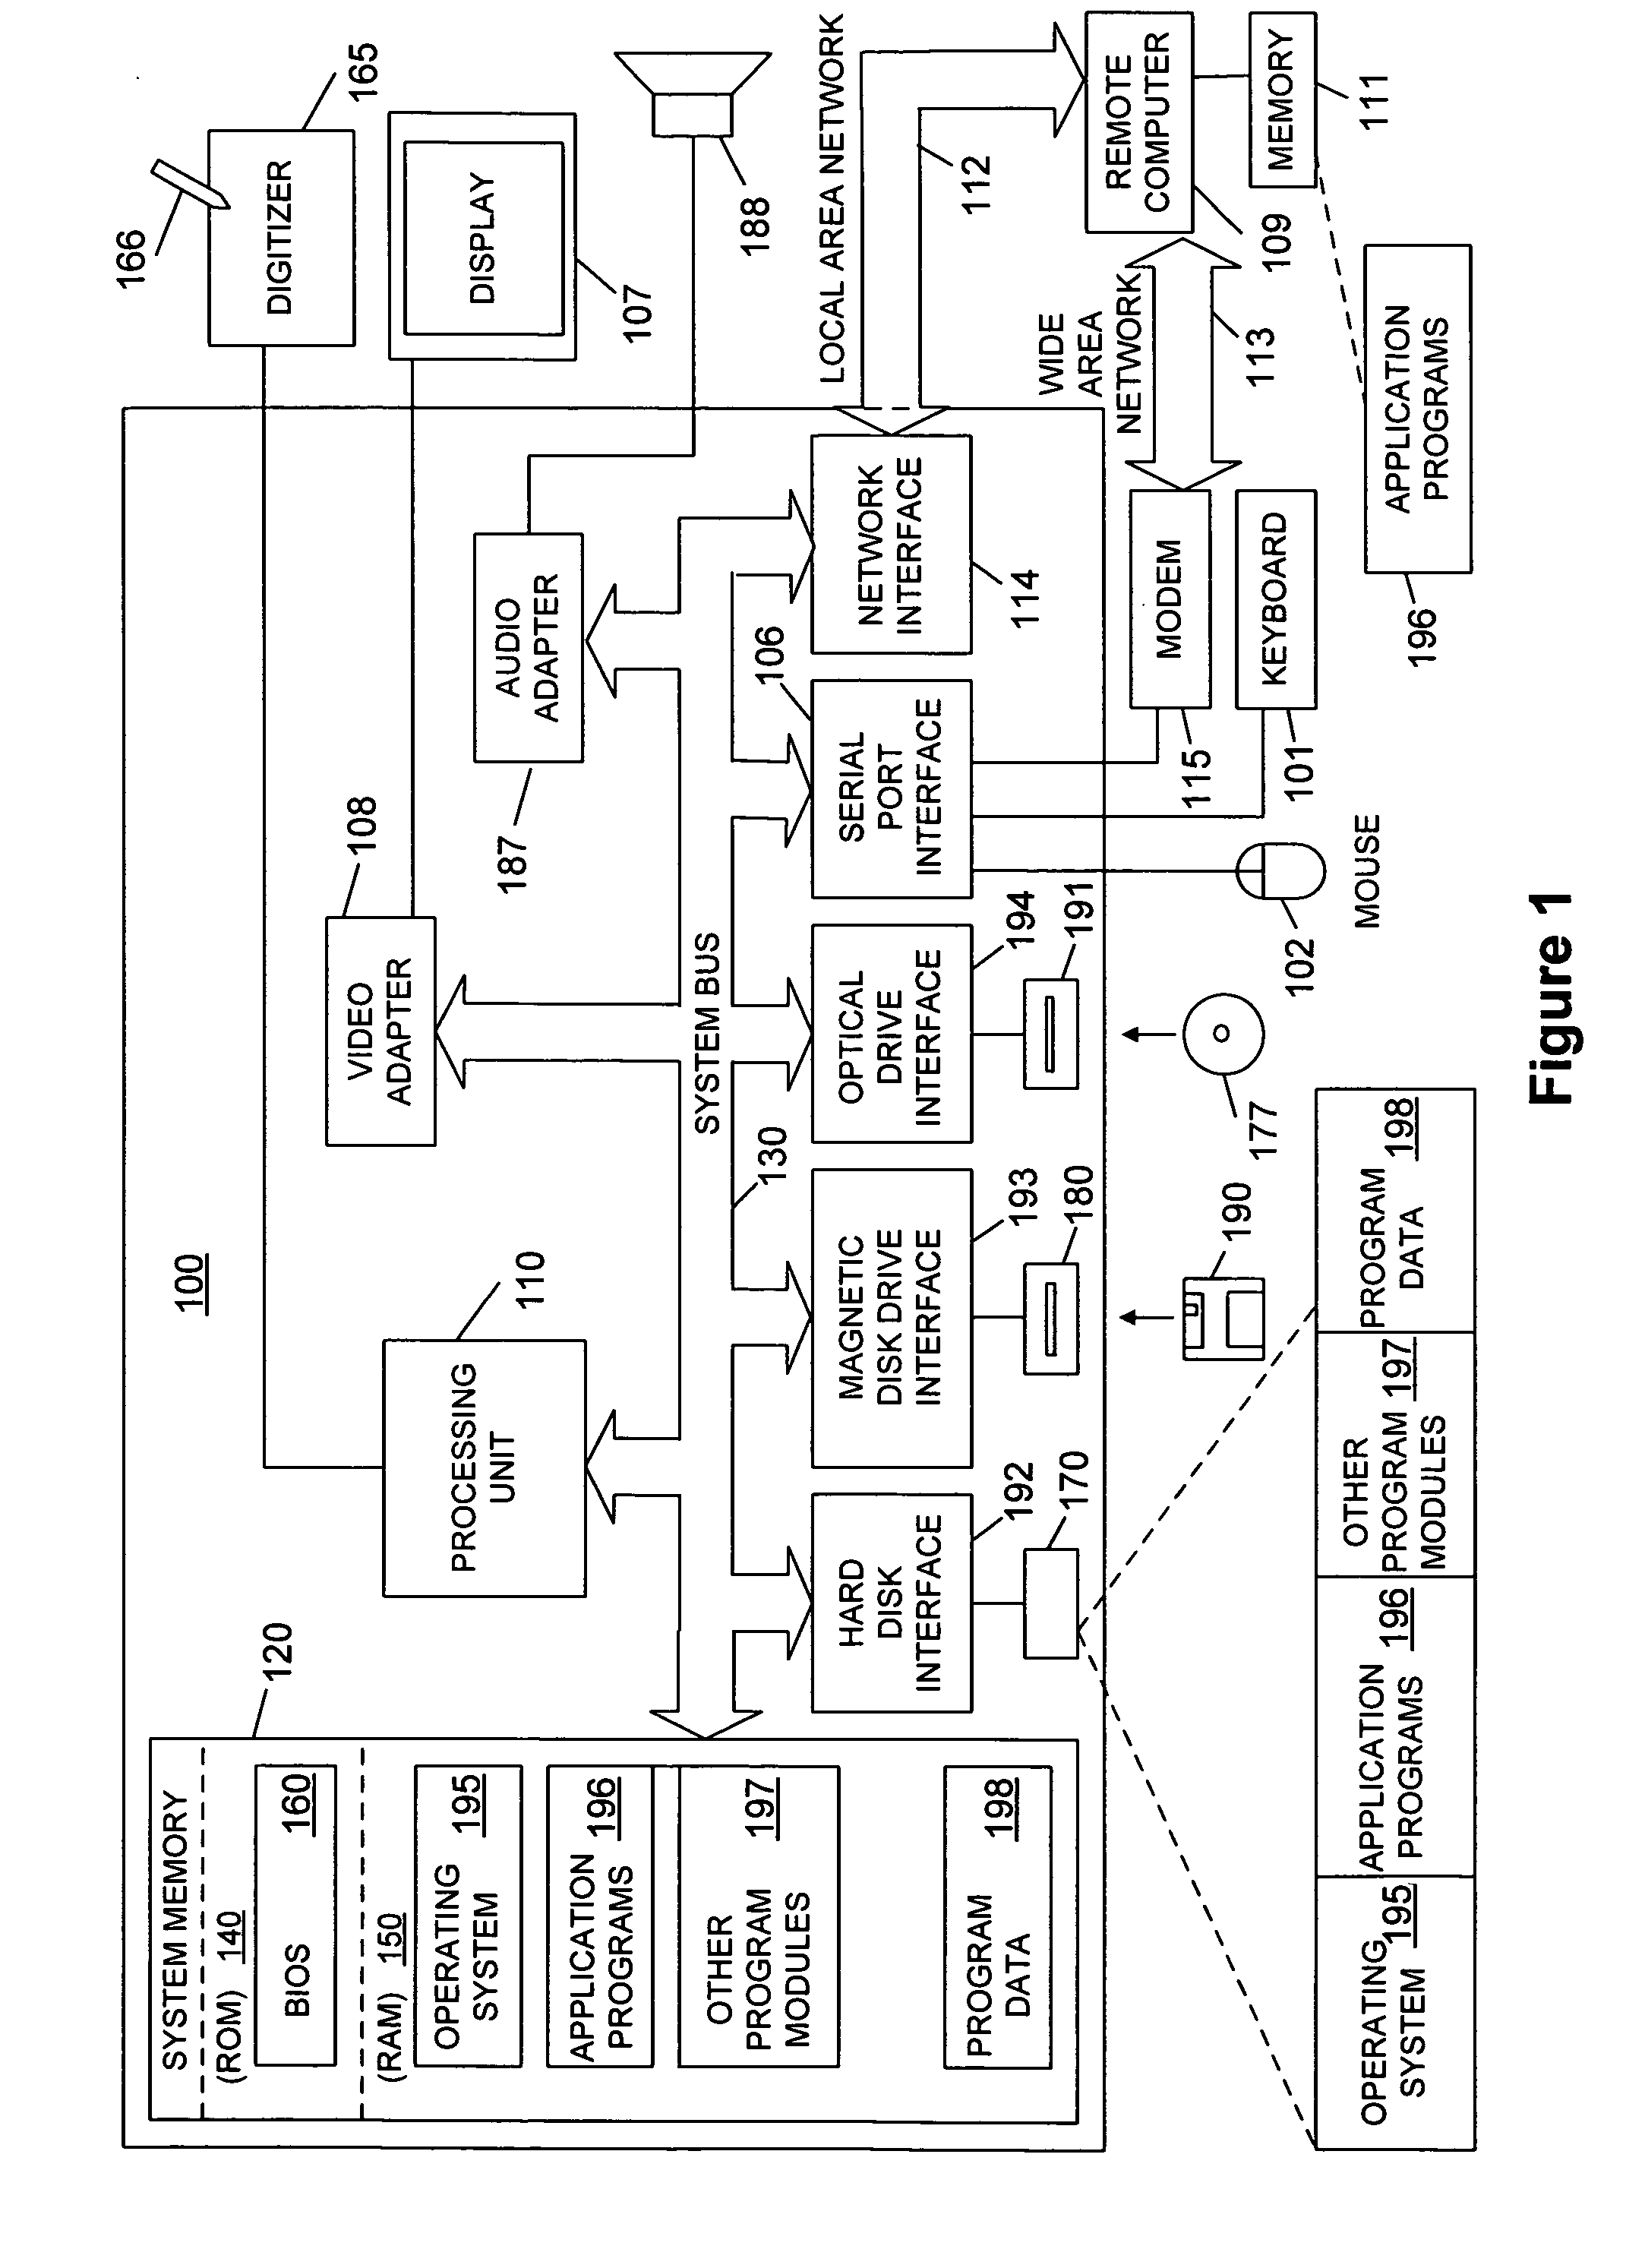 Multi-modal navigation in a graphical user interface computing system